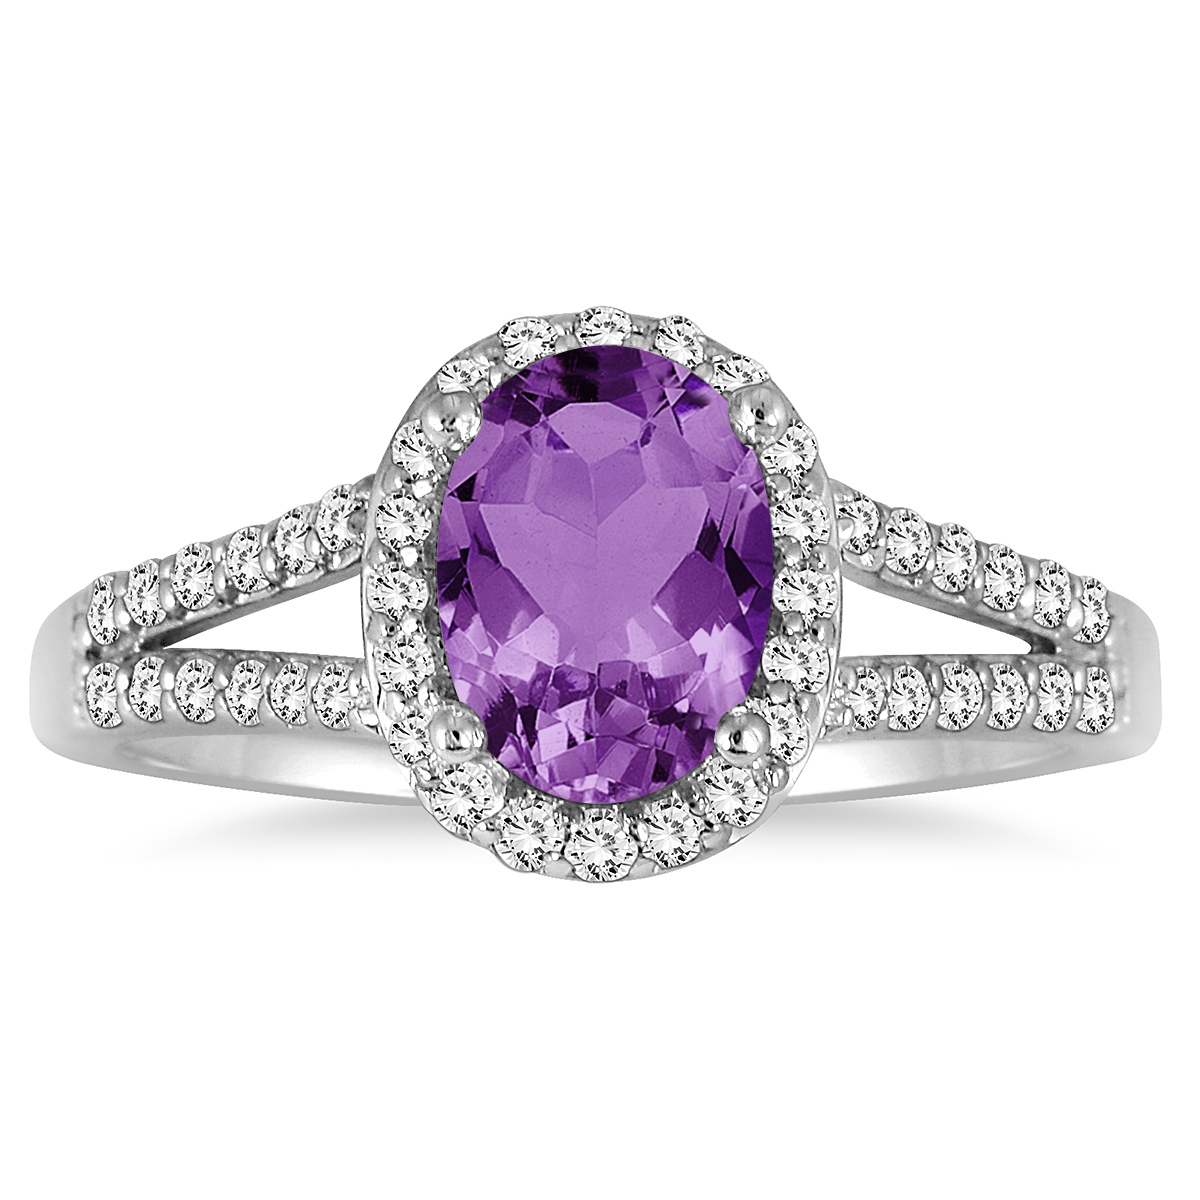 1 1/4 Carat Oval Amethyst and Diamond Ring in 10K White Gold